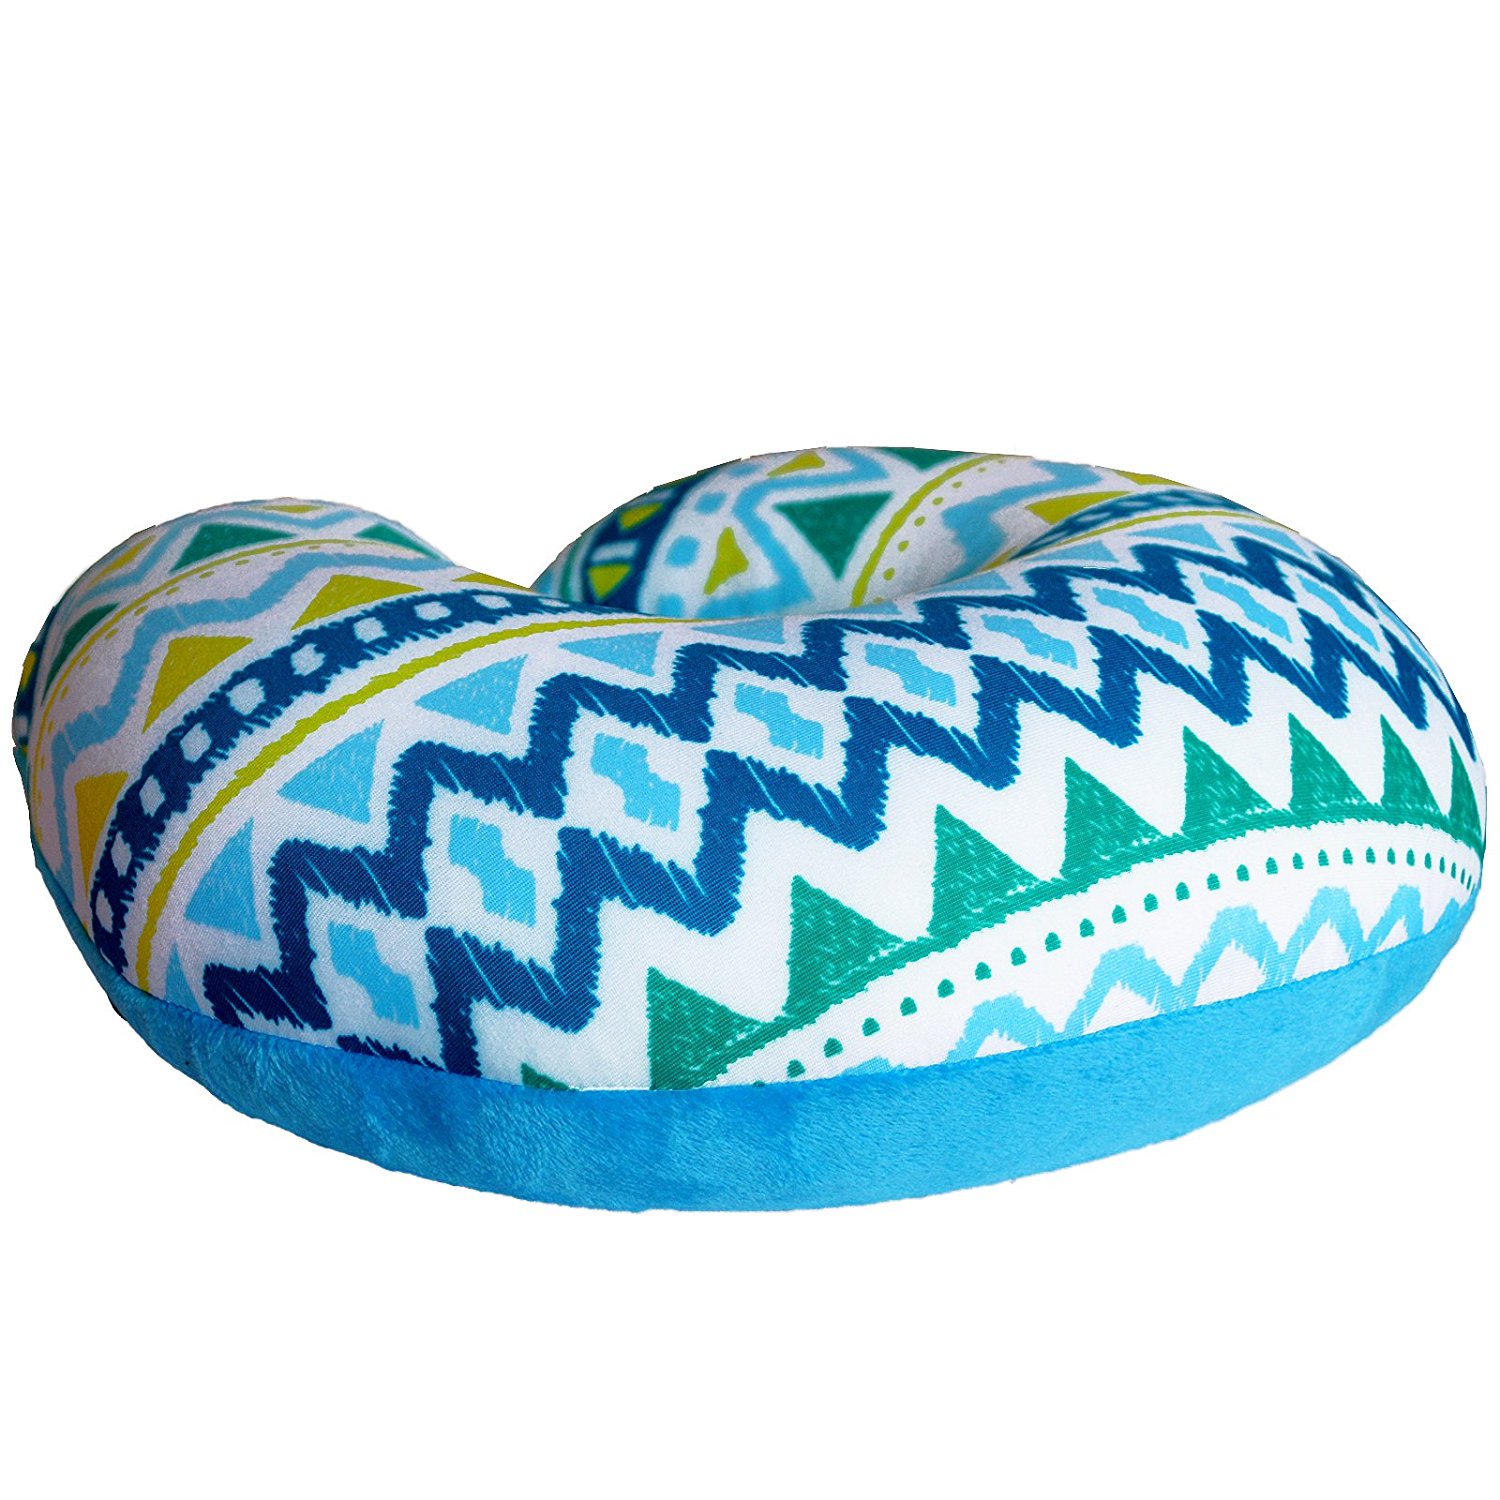 Bookishbunny Ultralight Micro Beads U Shaped Neck Pillow Travel Head Cervical Support Cushion - image 3 of 6